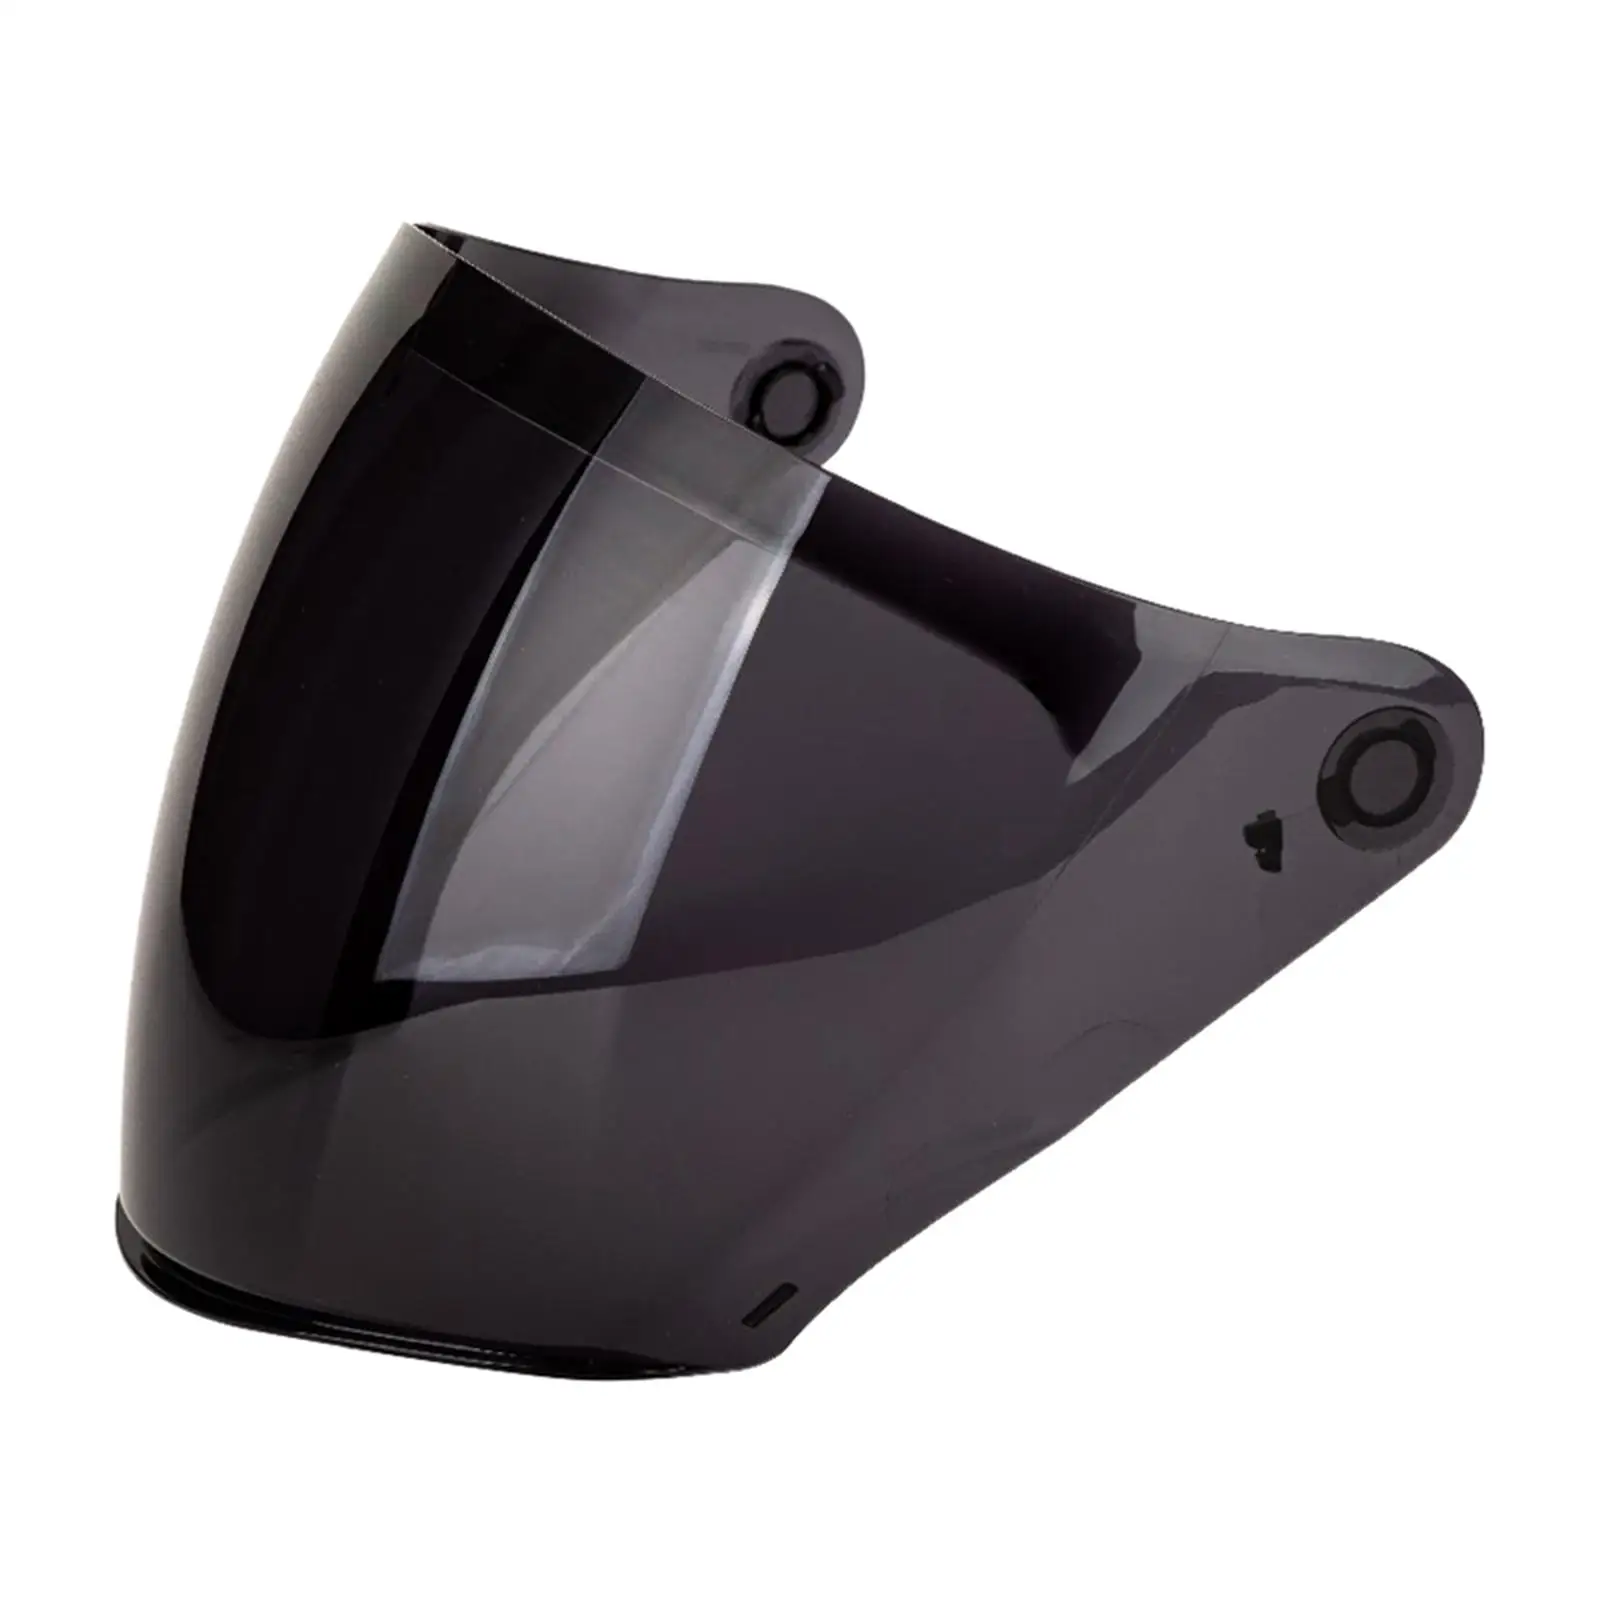 Open Face  Visor Wind Shield Lens Accessories Parts for KYT NFJ Advanced manufacturing technology